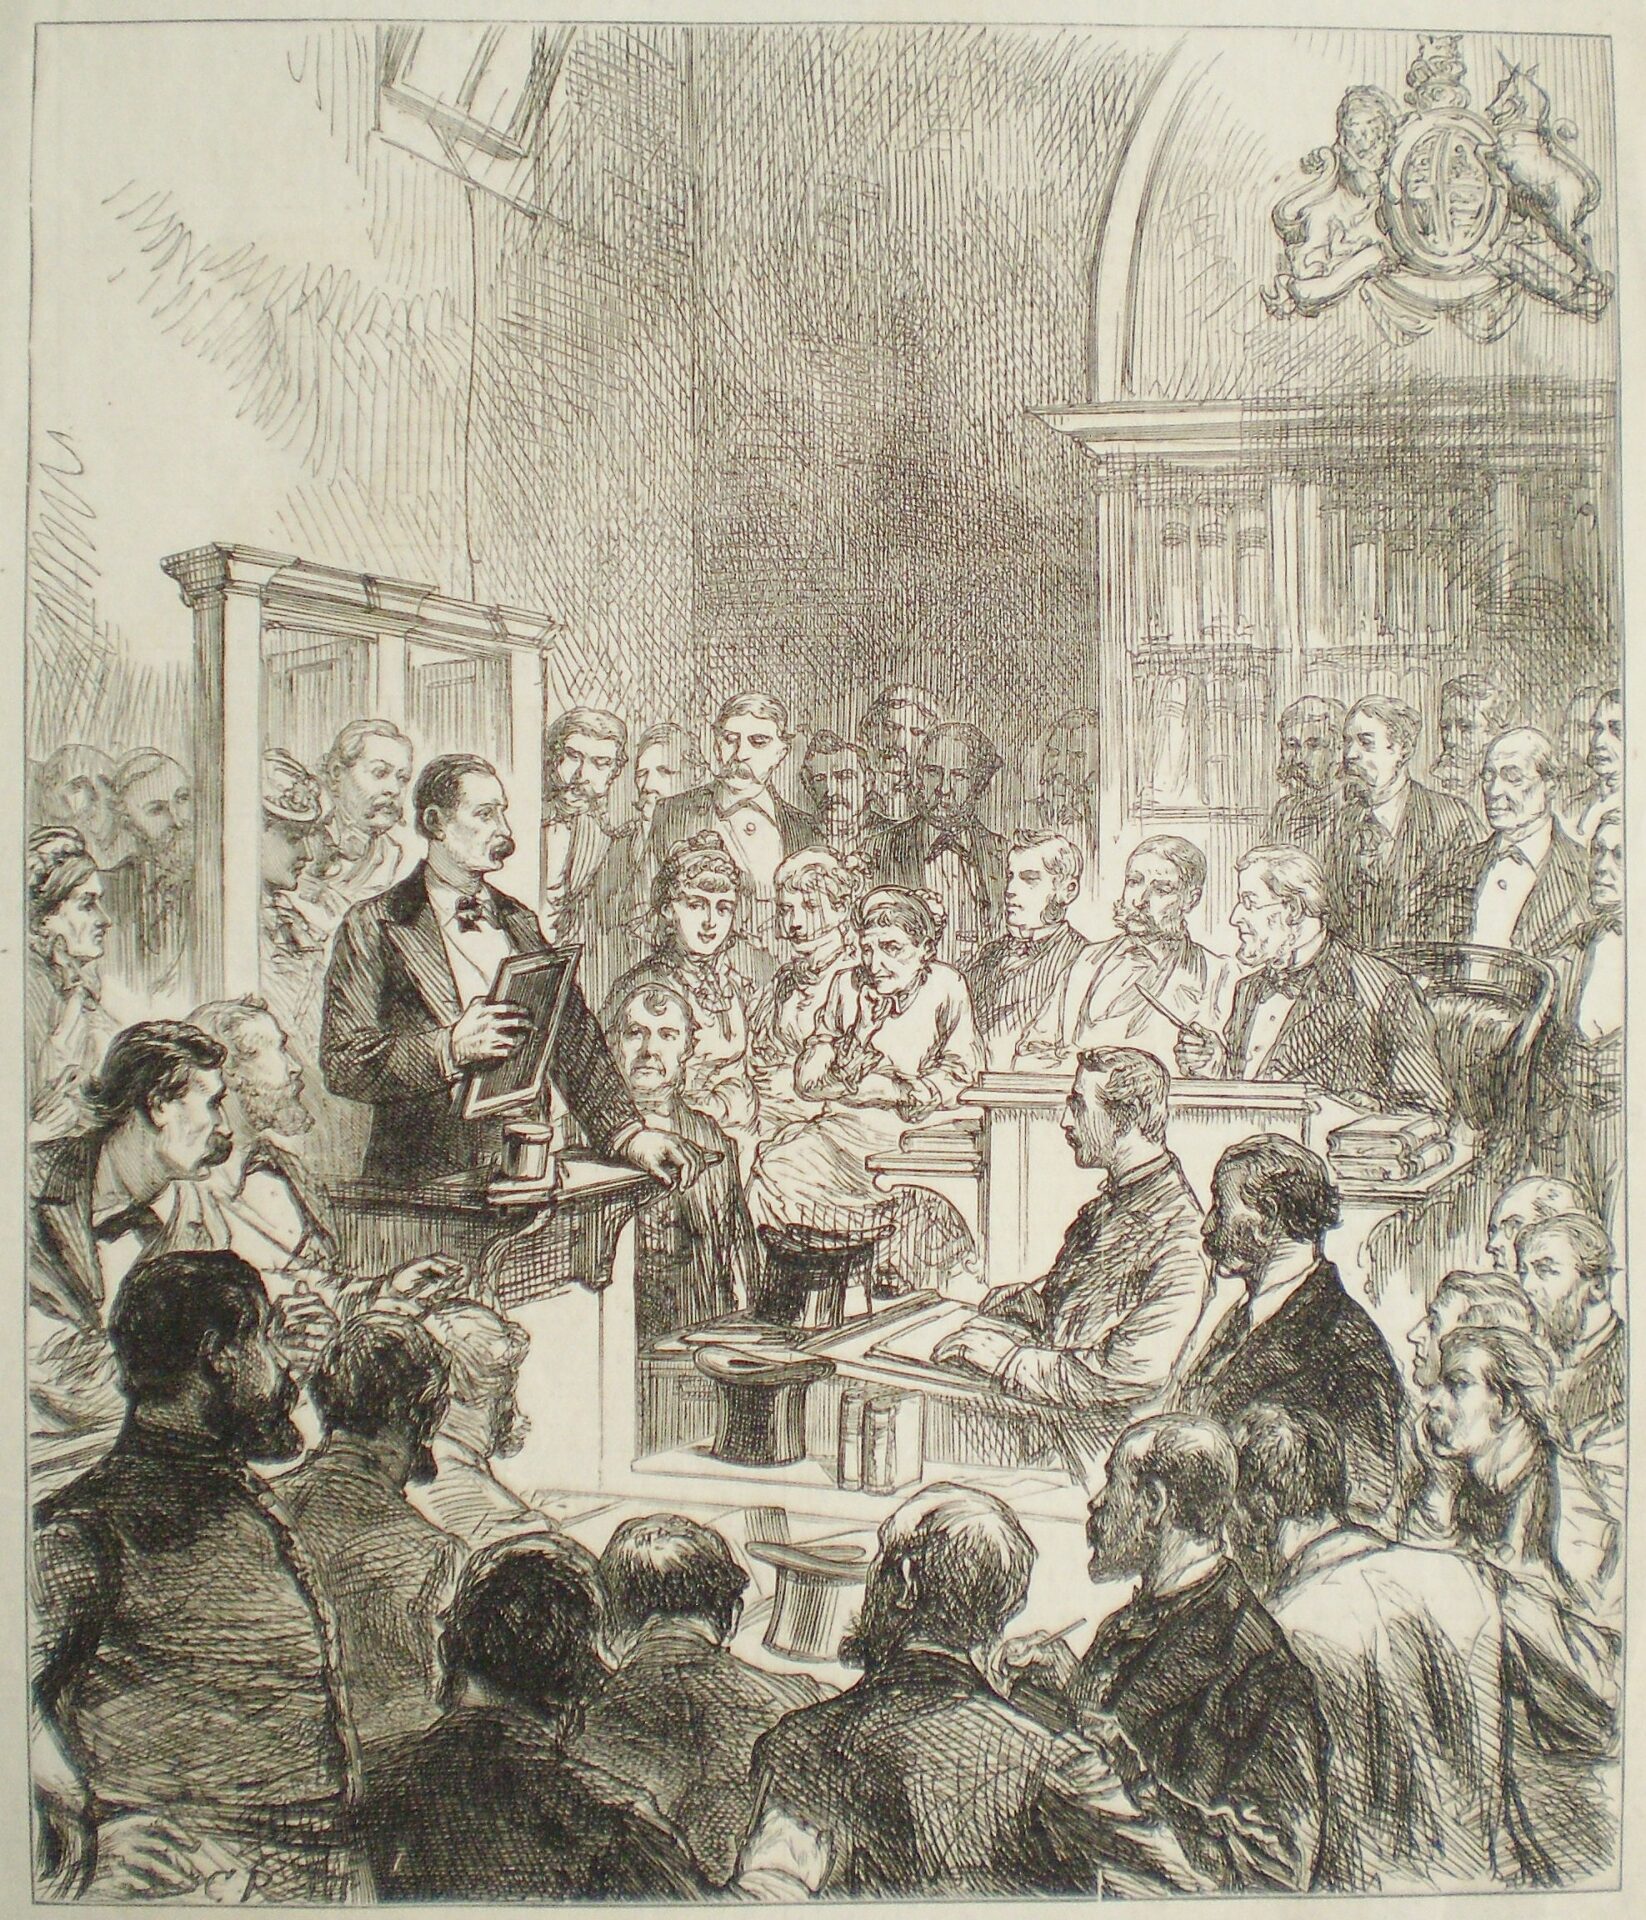 Spirit-writing at Bow Street: J.N. Maskelyne at the Slade trial from the Illustrated London News, 1876